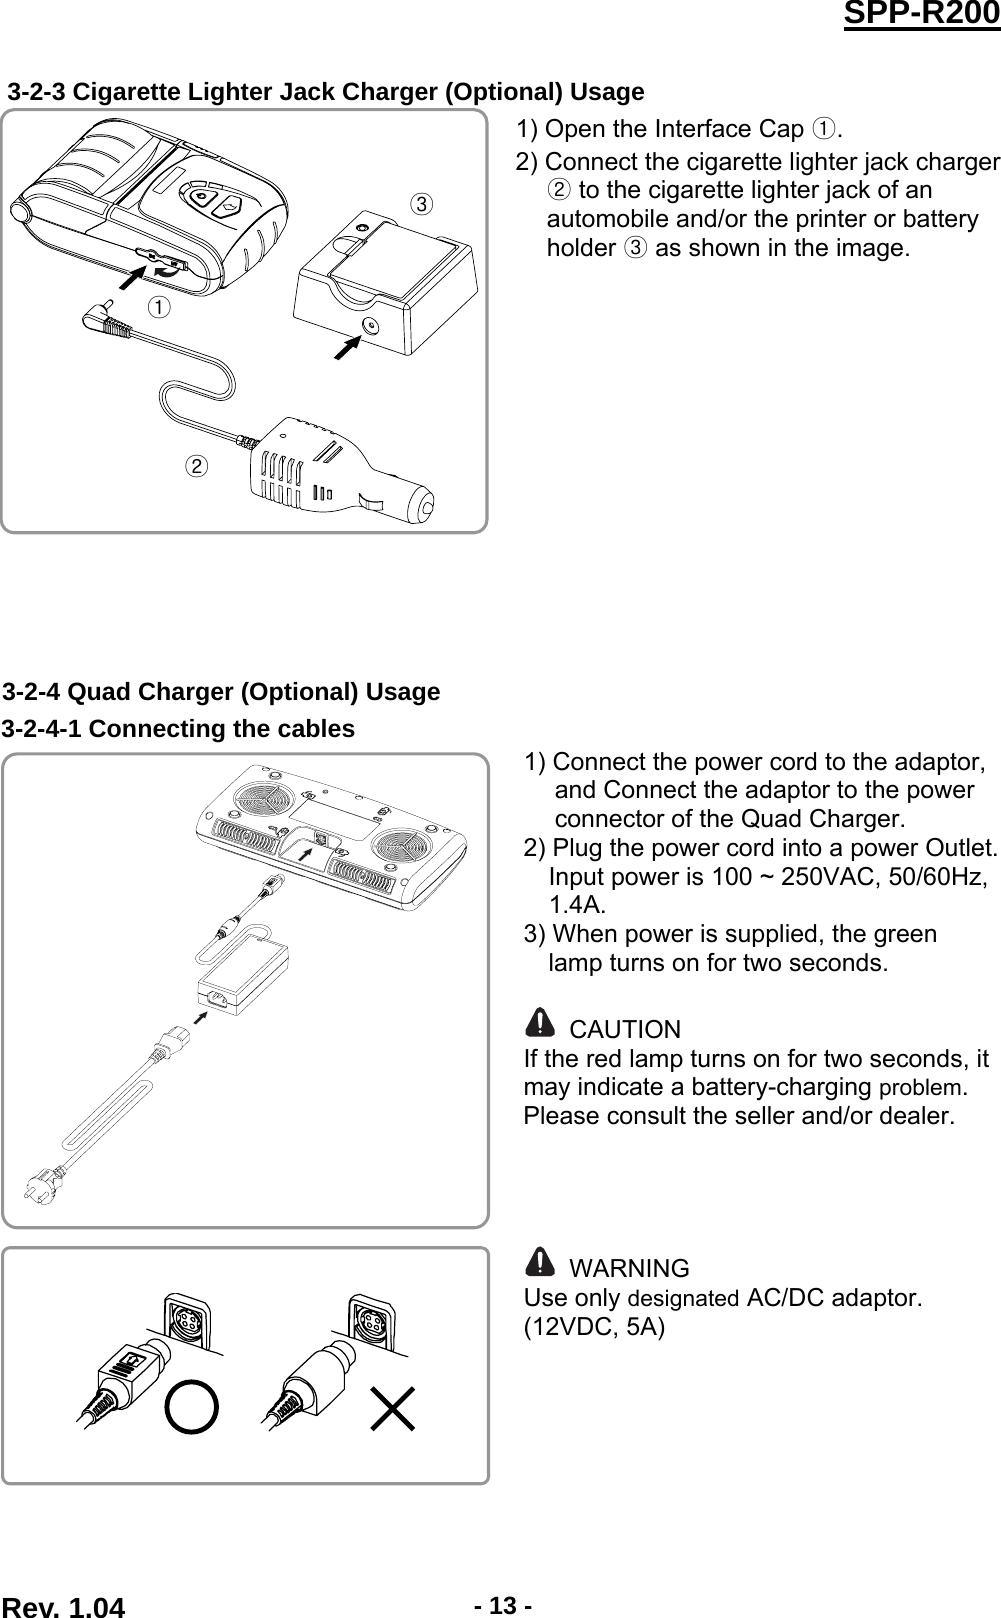  Rev. 1.04  - 13 -SPP-R200 3-2-3 Cigarette Lighter Jack Charger (Optional) Usage  1) Open the Interface Cap . 2) Connect the cigarette lighter jack charger  to the cigarette lighter jack of an automobile and/or the printer or battery holder  as shown in the image.  3-2-4 Quad Charger (Optional) Usage 3-2-4-1 Connecting the cables  1) Connect the power cord to the adaptor, and Connect the adaptor to the power connector of the Quad Charger. 2) Plug the power cord into a power Outlet. Input power is 100 ~ 250VAC, 50/60Hz, 1.4A. 3) When power is supplied, the green                lamp turns on for two seconds.   CAUTION If the red lamp turns on for two seconds, it may indicate a battery-charging problem. Please consult the seller and/or dealer.      WARNING Use only designated AC/DC adaptor. (12VDC, 5A)        